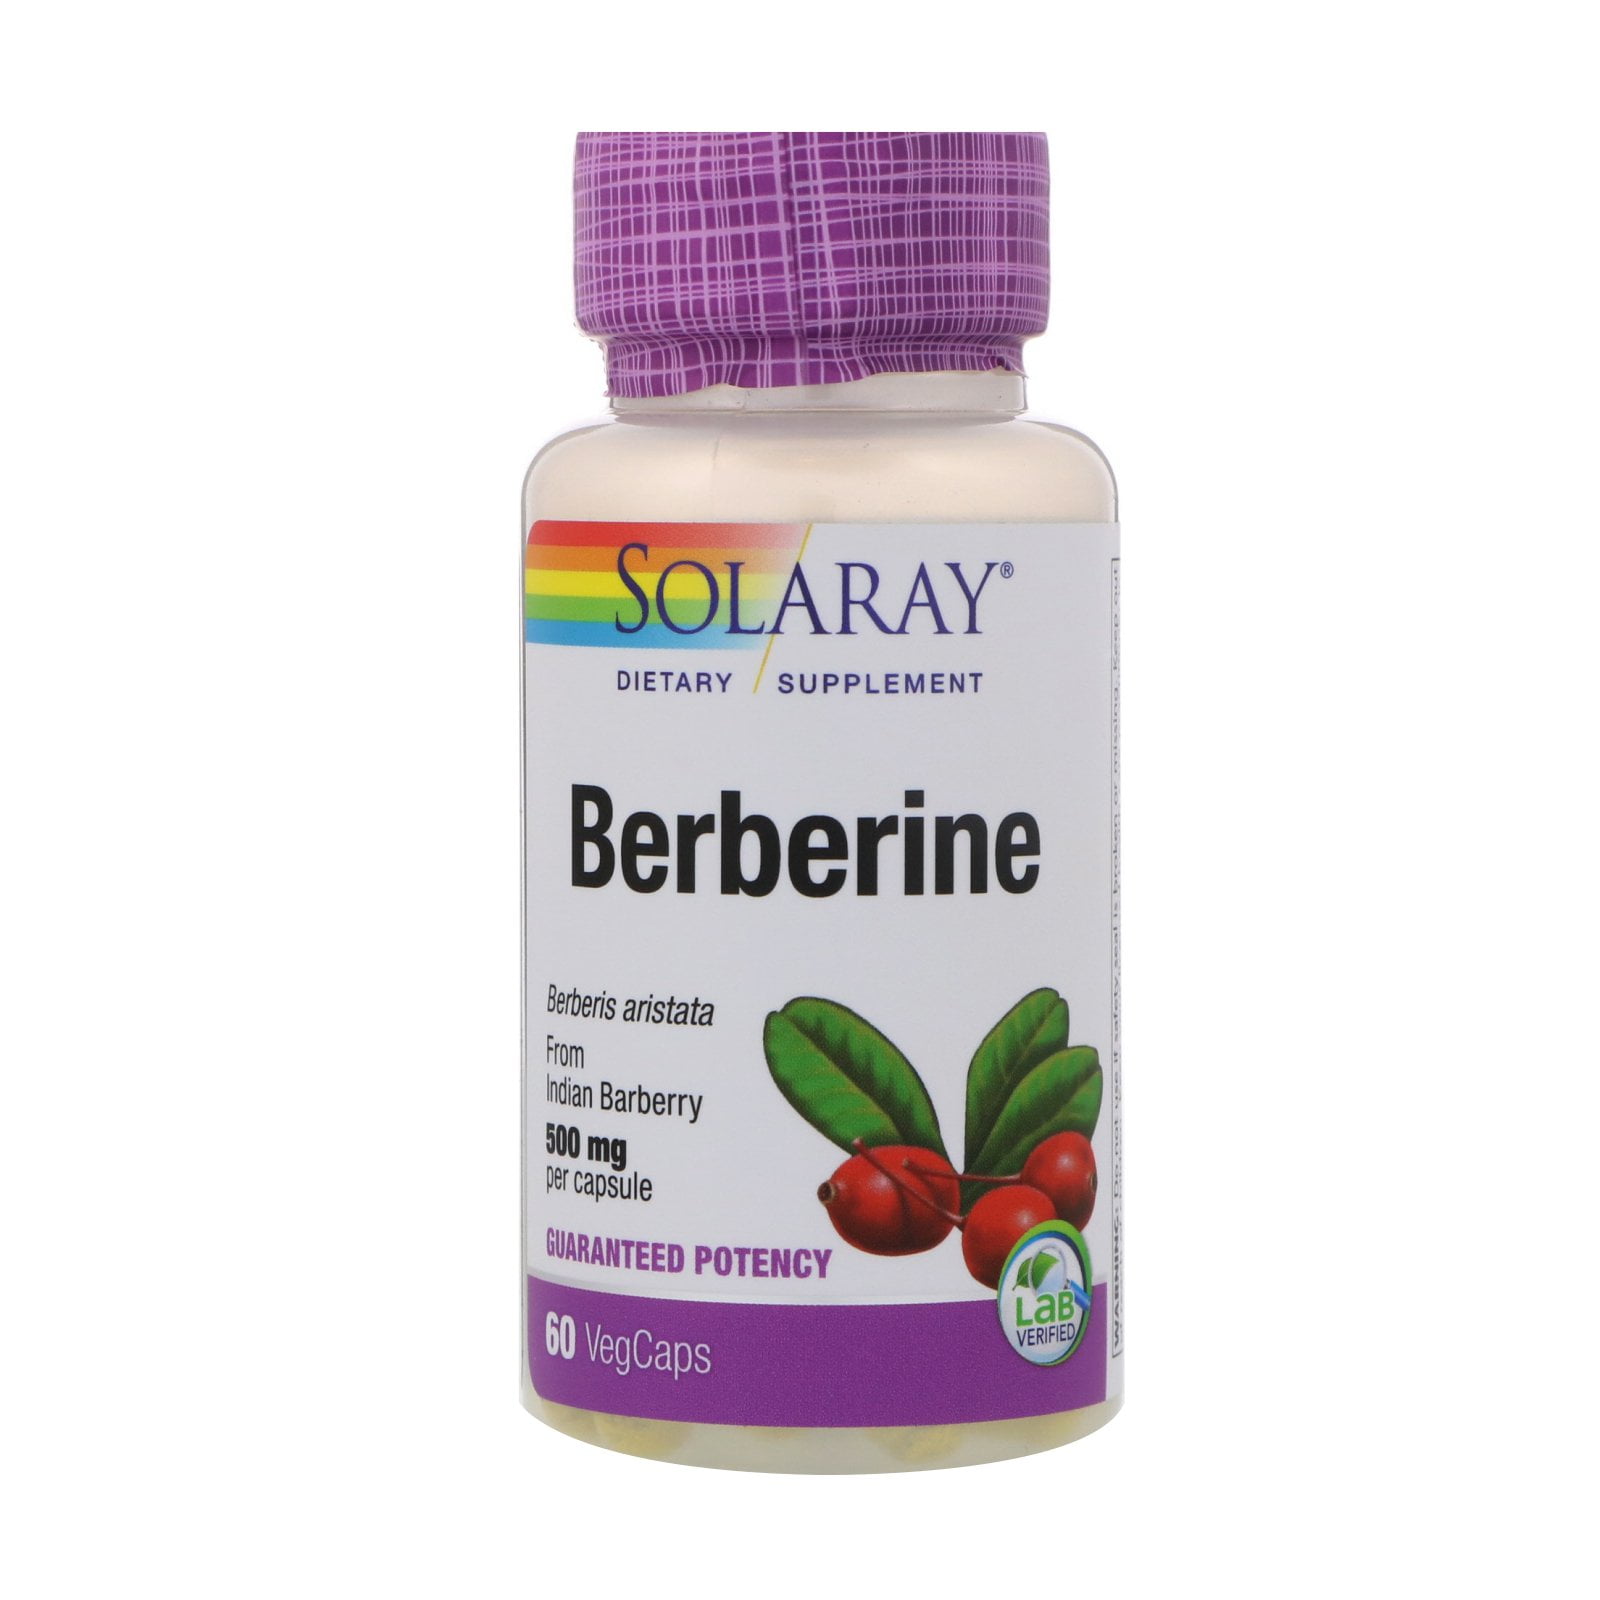 Solaray Berberine 500mg | From Indian Barberry Root Extract | Digestive .